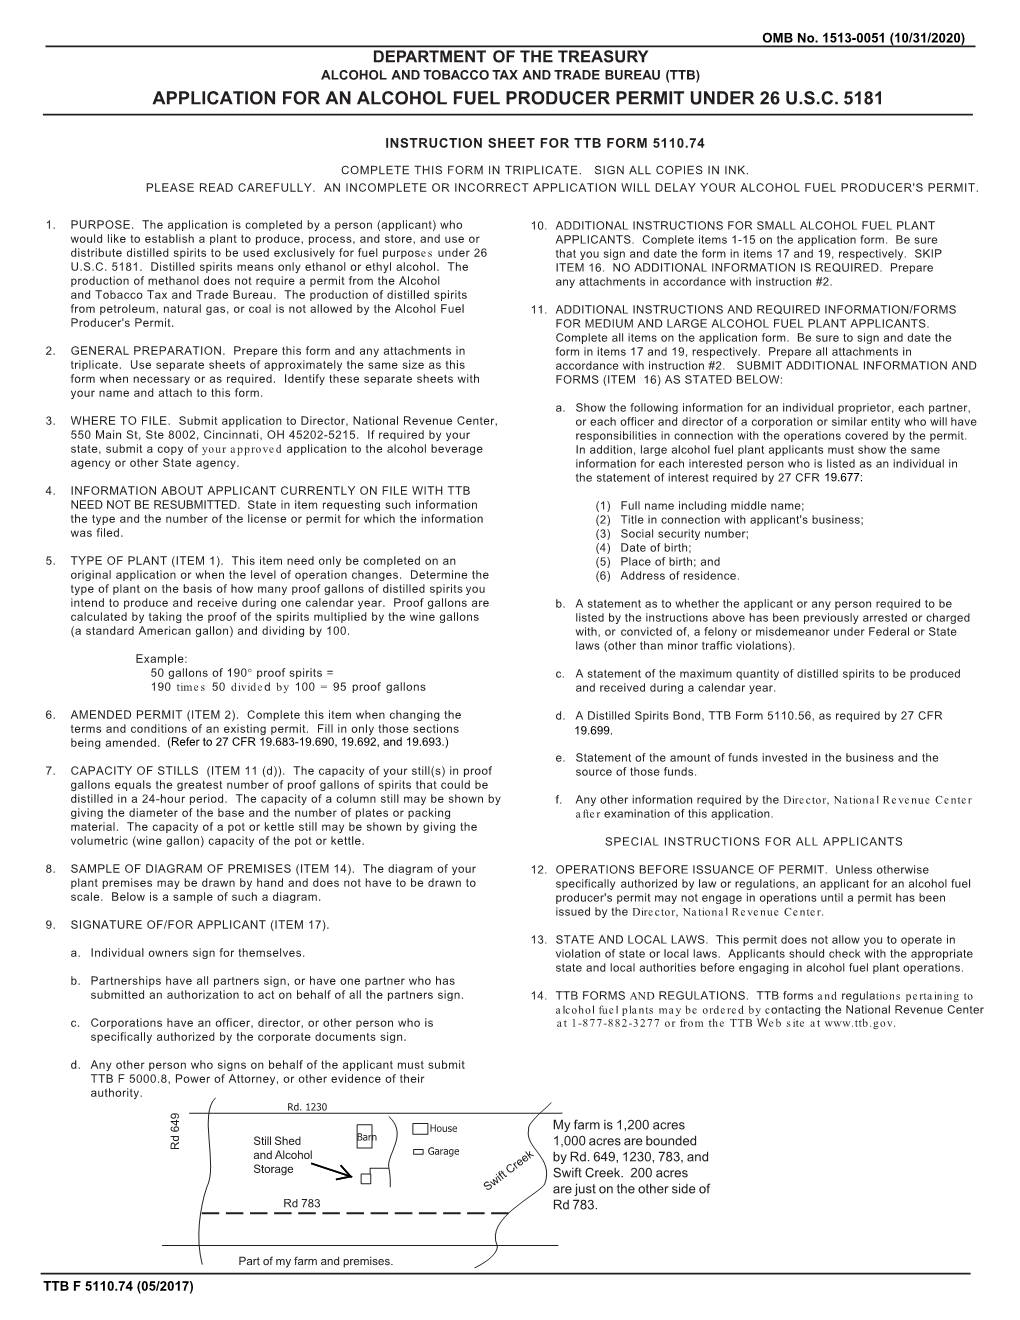 Ttb F 5110.74 Application for an Alcohol Fuel Producer